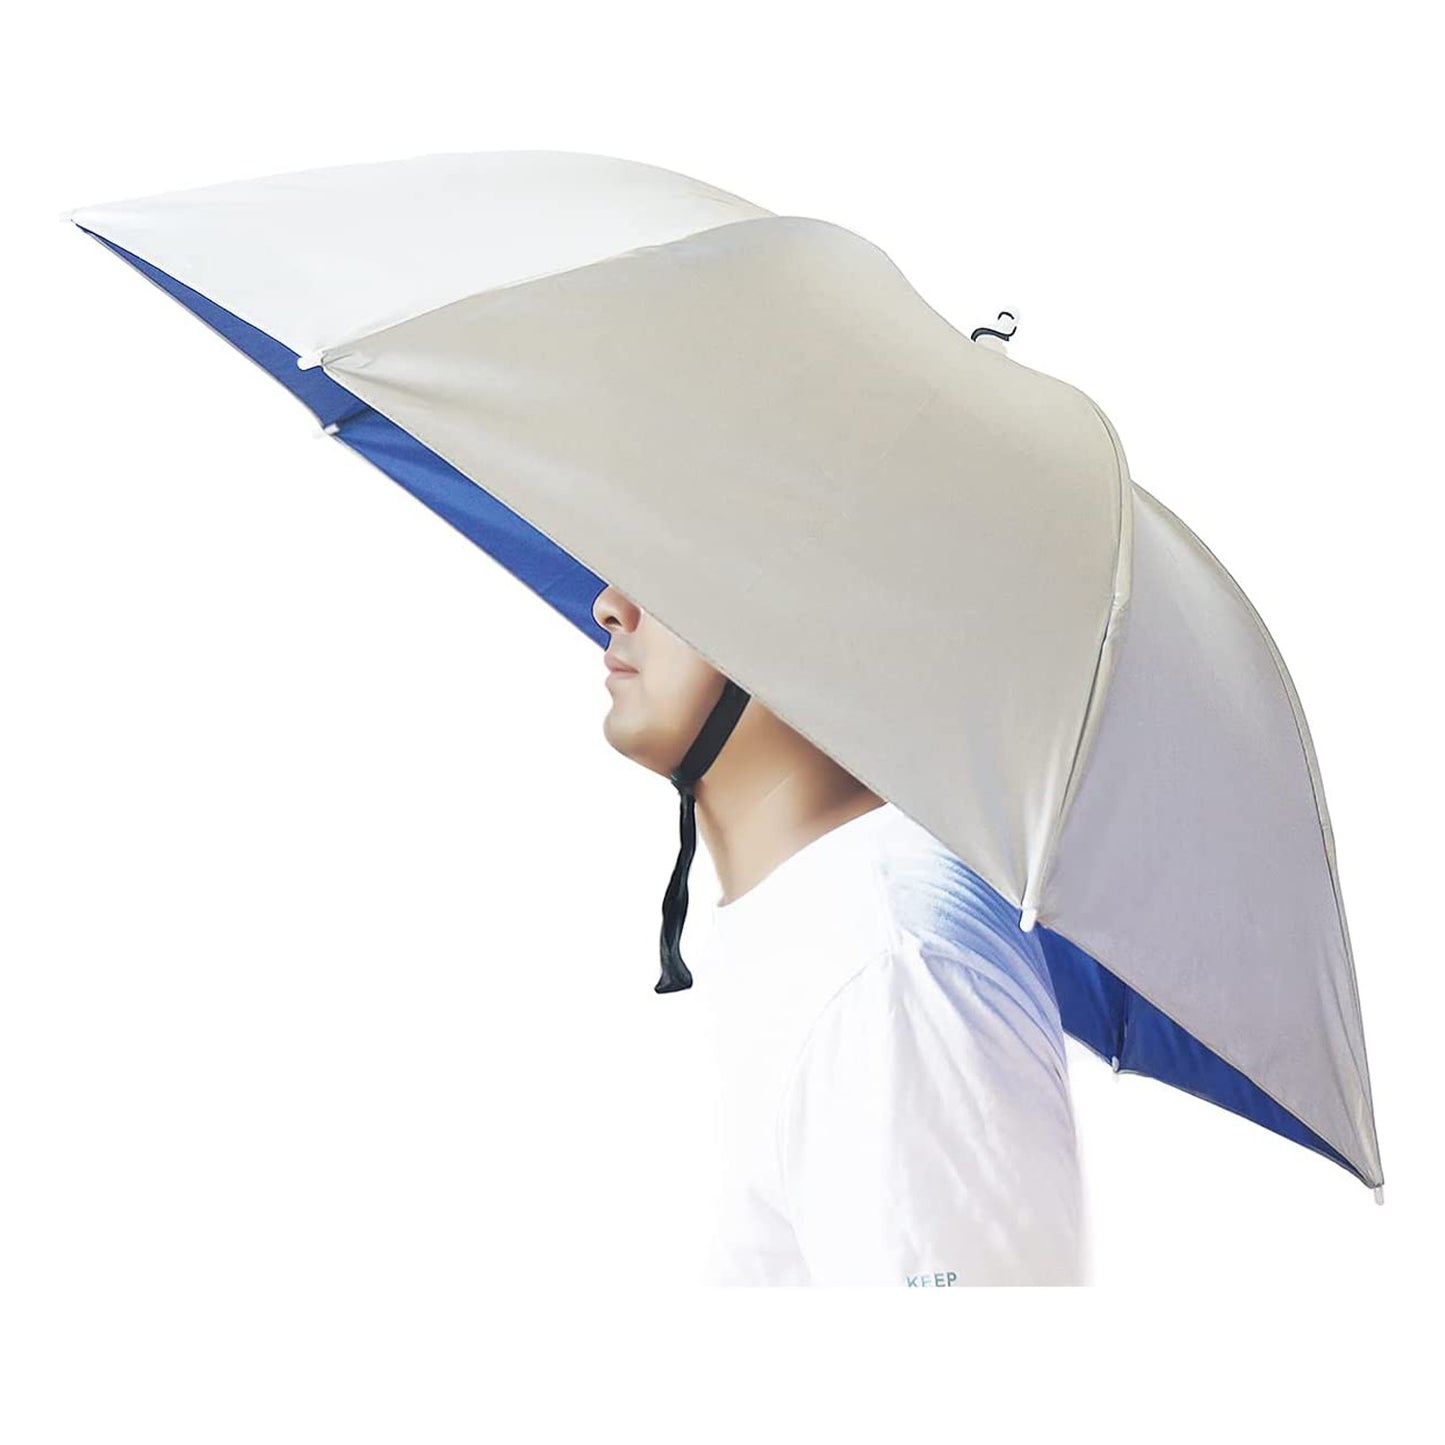 35 Inch Hands Free Foldable Anti UV Adjustable Umbrella Cap Suitable For Fishing Golf Camping Beach Gardening Sun Shade Outdoor